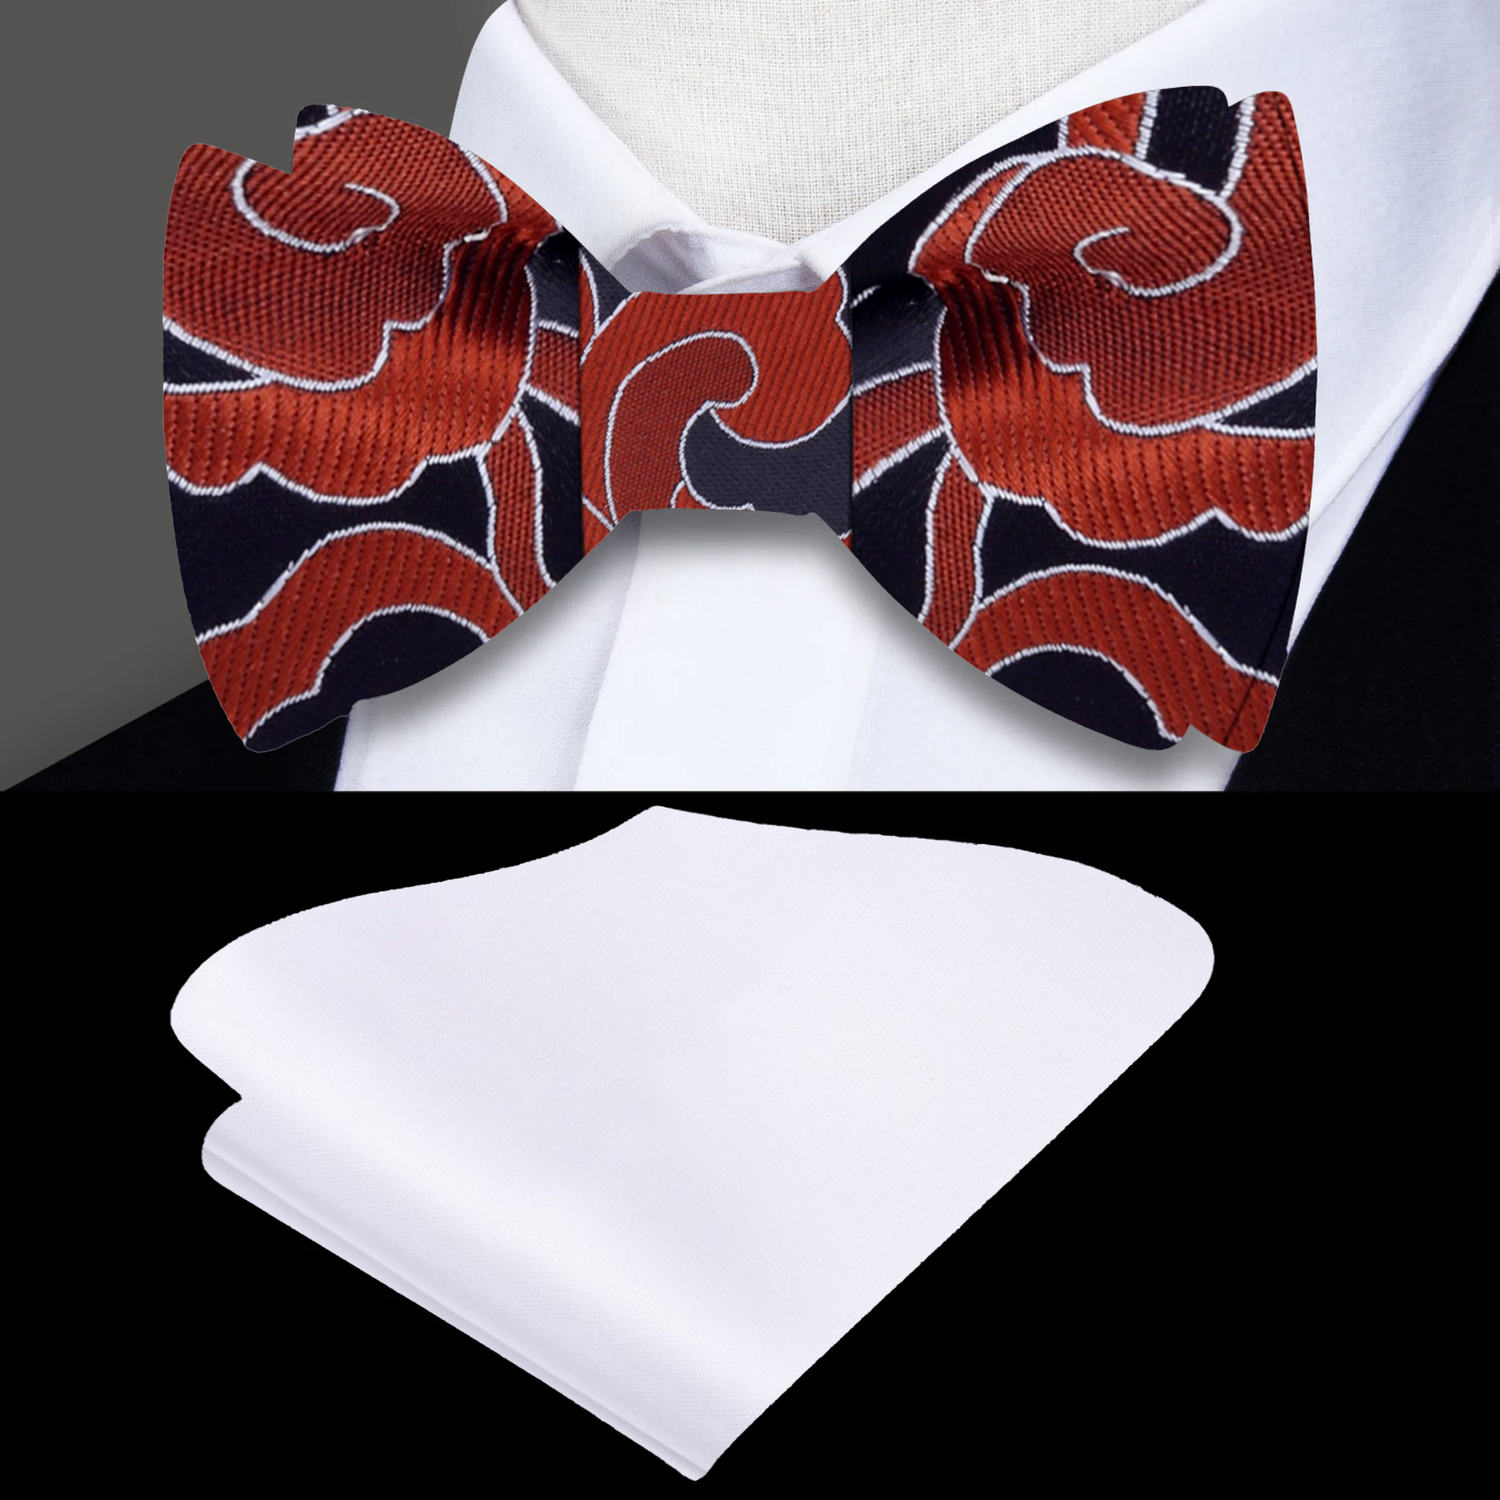 Black, Brown Abstract Self Tie Bow Tie and White Square